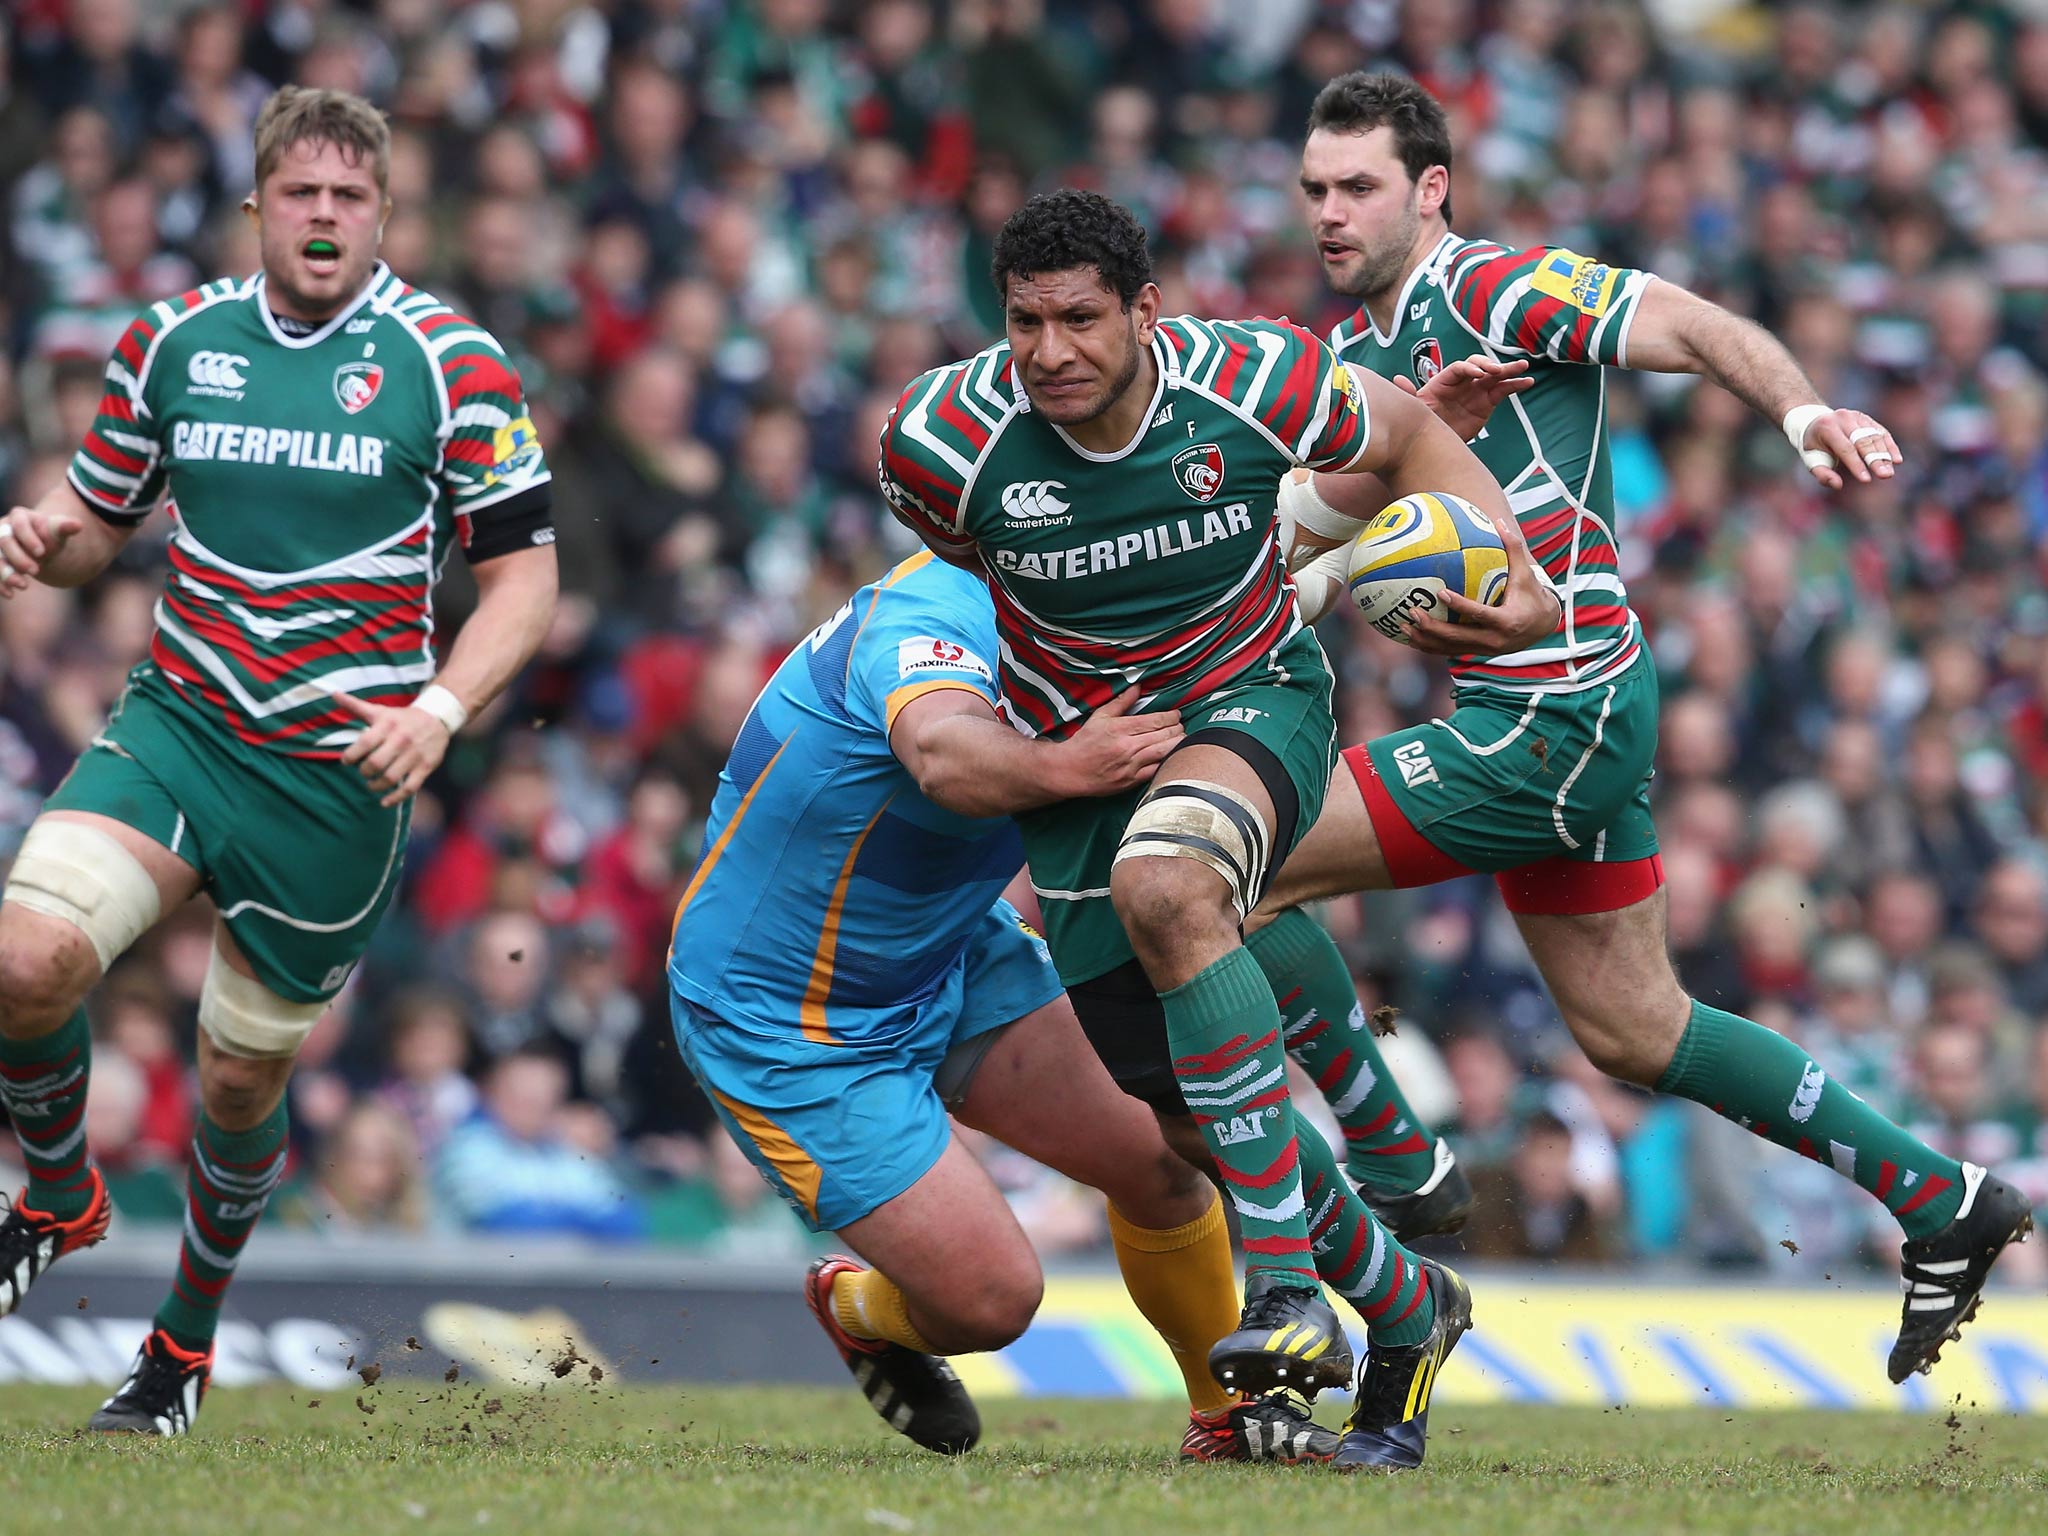 Steve Mafi of Leicester charges upfield during the Aviva Premiership match between Leicester Tigers and London Wasps